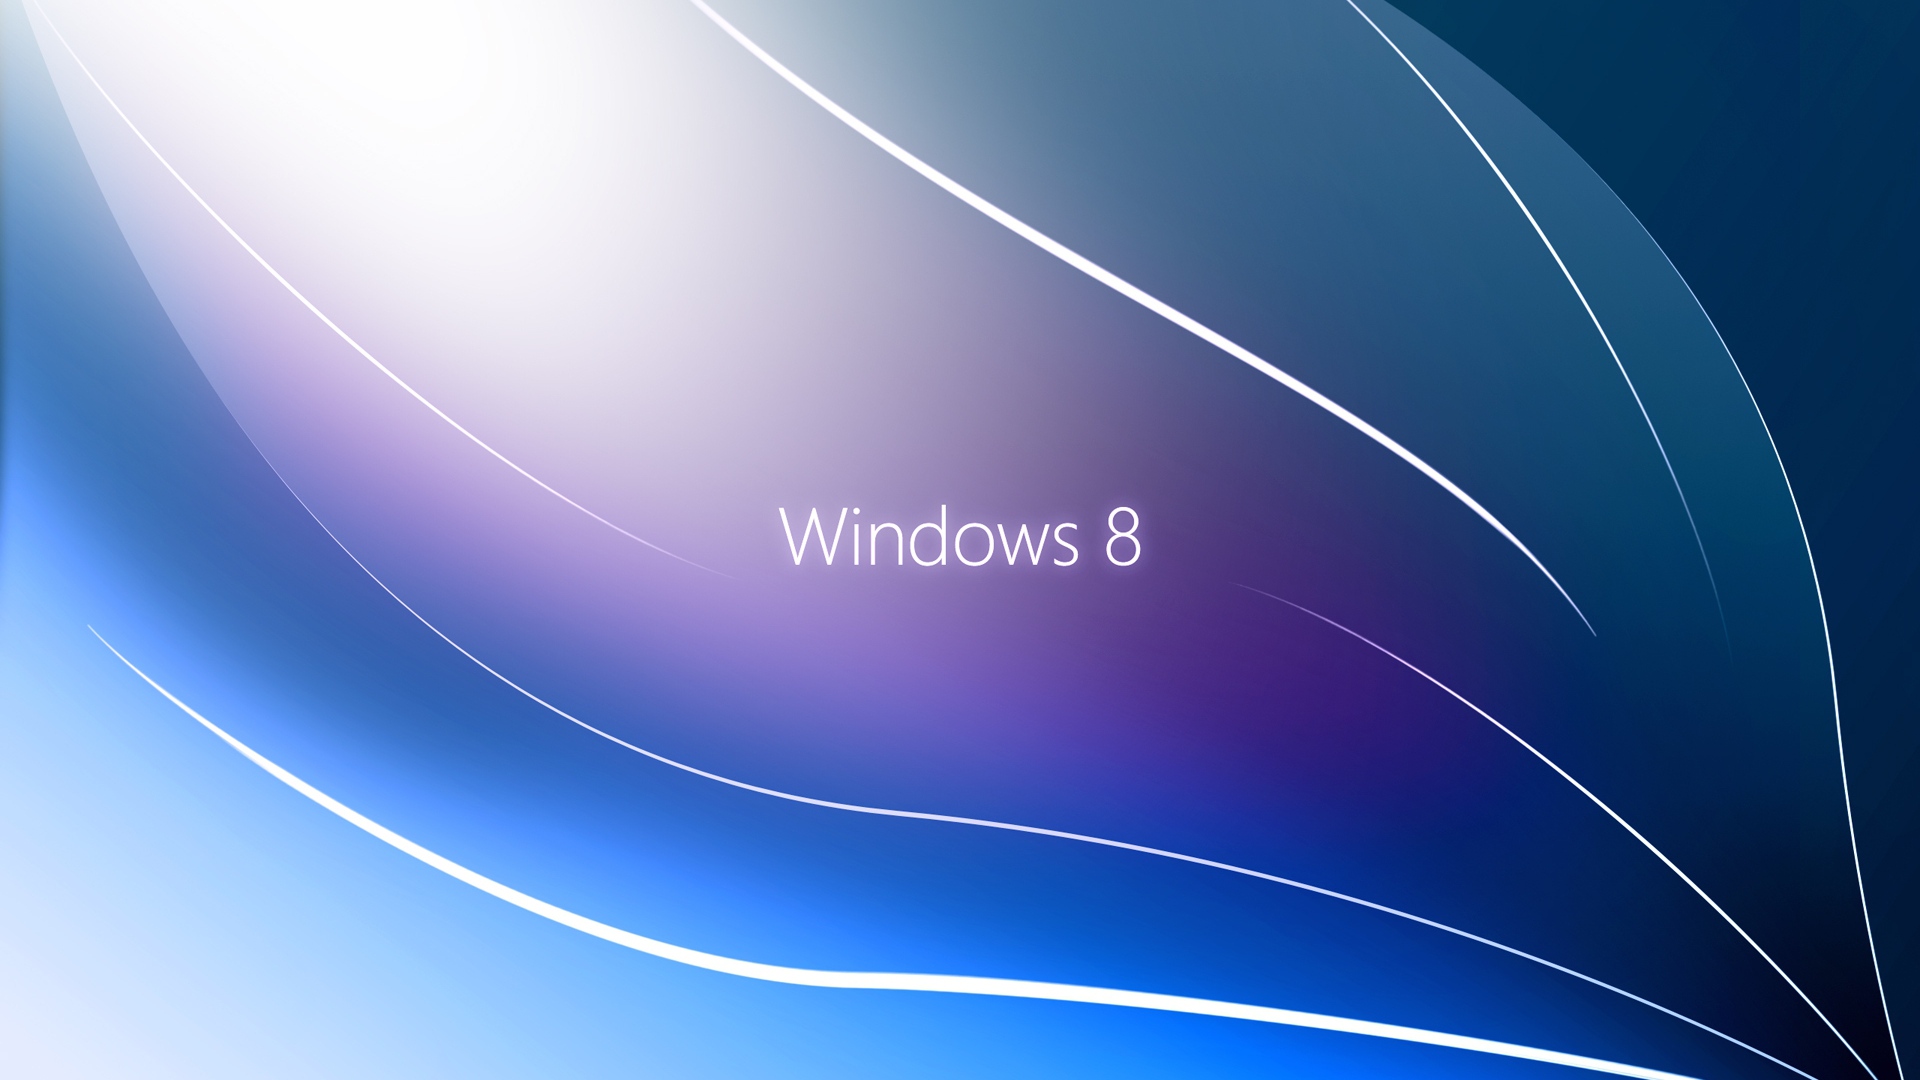 Wallpapers windows 8 microsoft operating system on the desktop